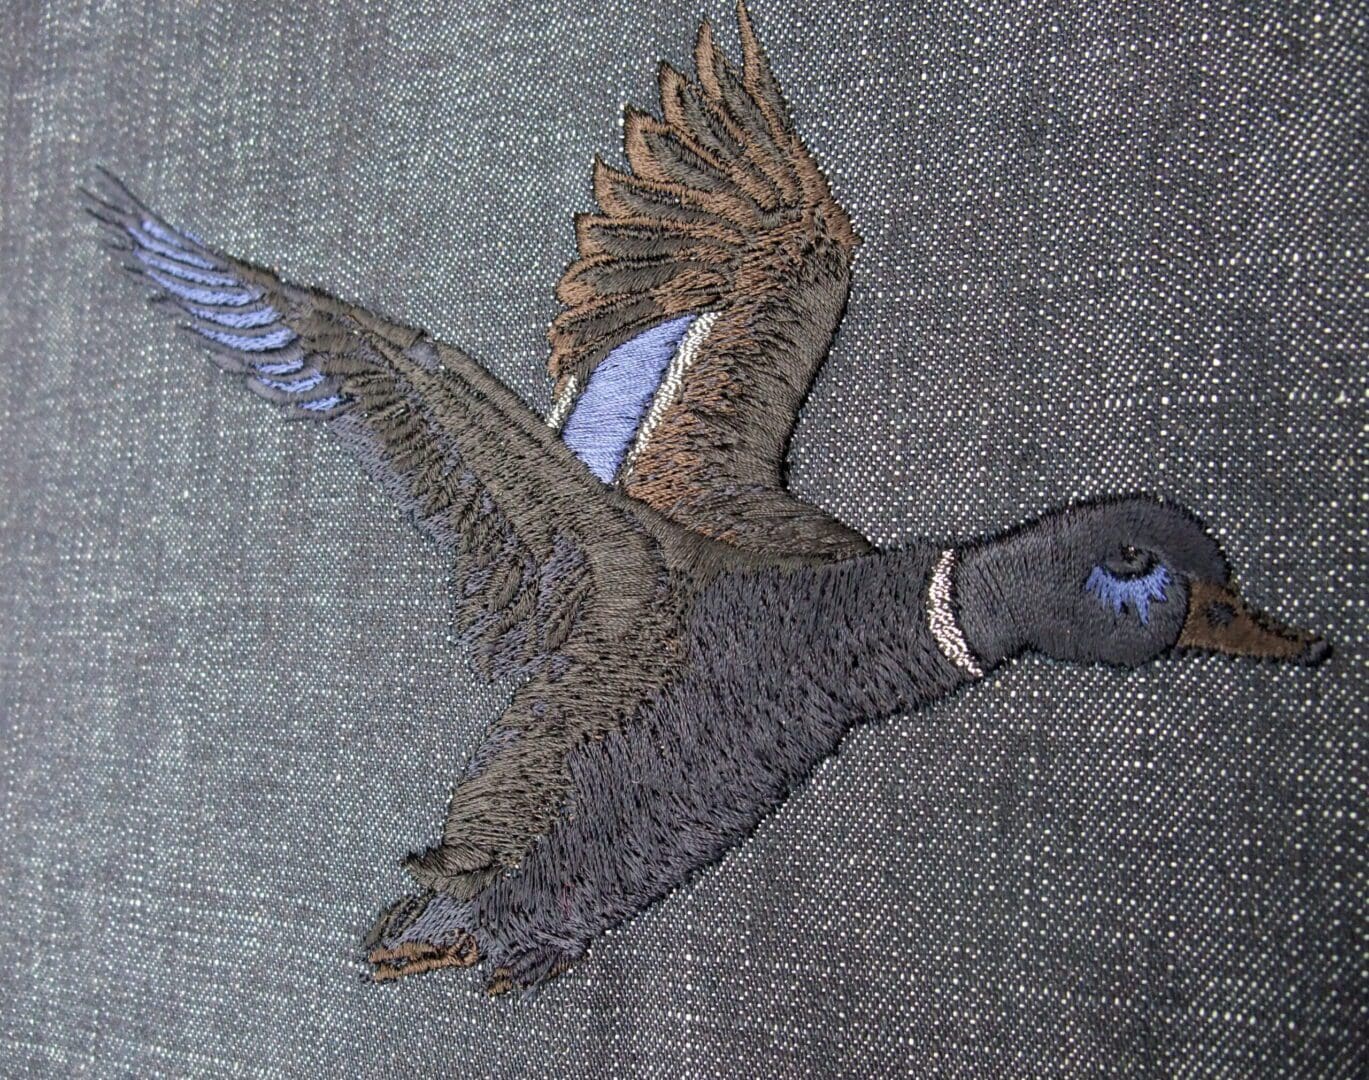 Nearly all black shade of embroidery for a flying Mallard duck design in stitch on black denim fabric